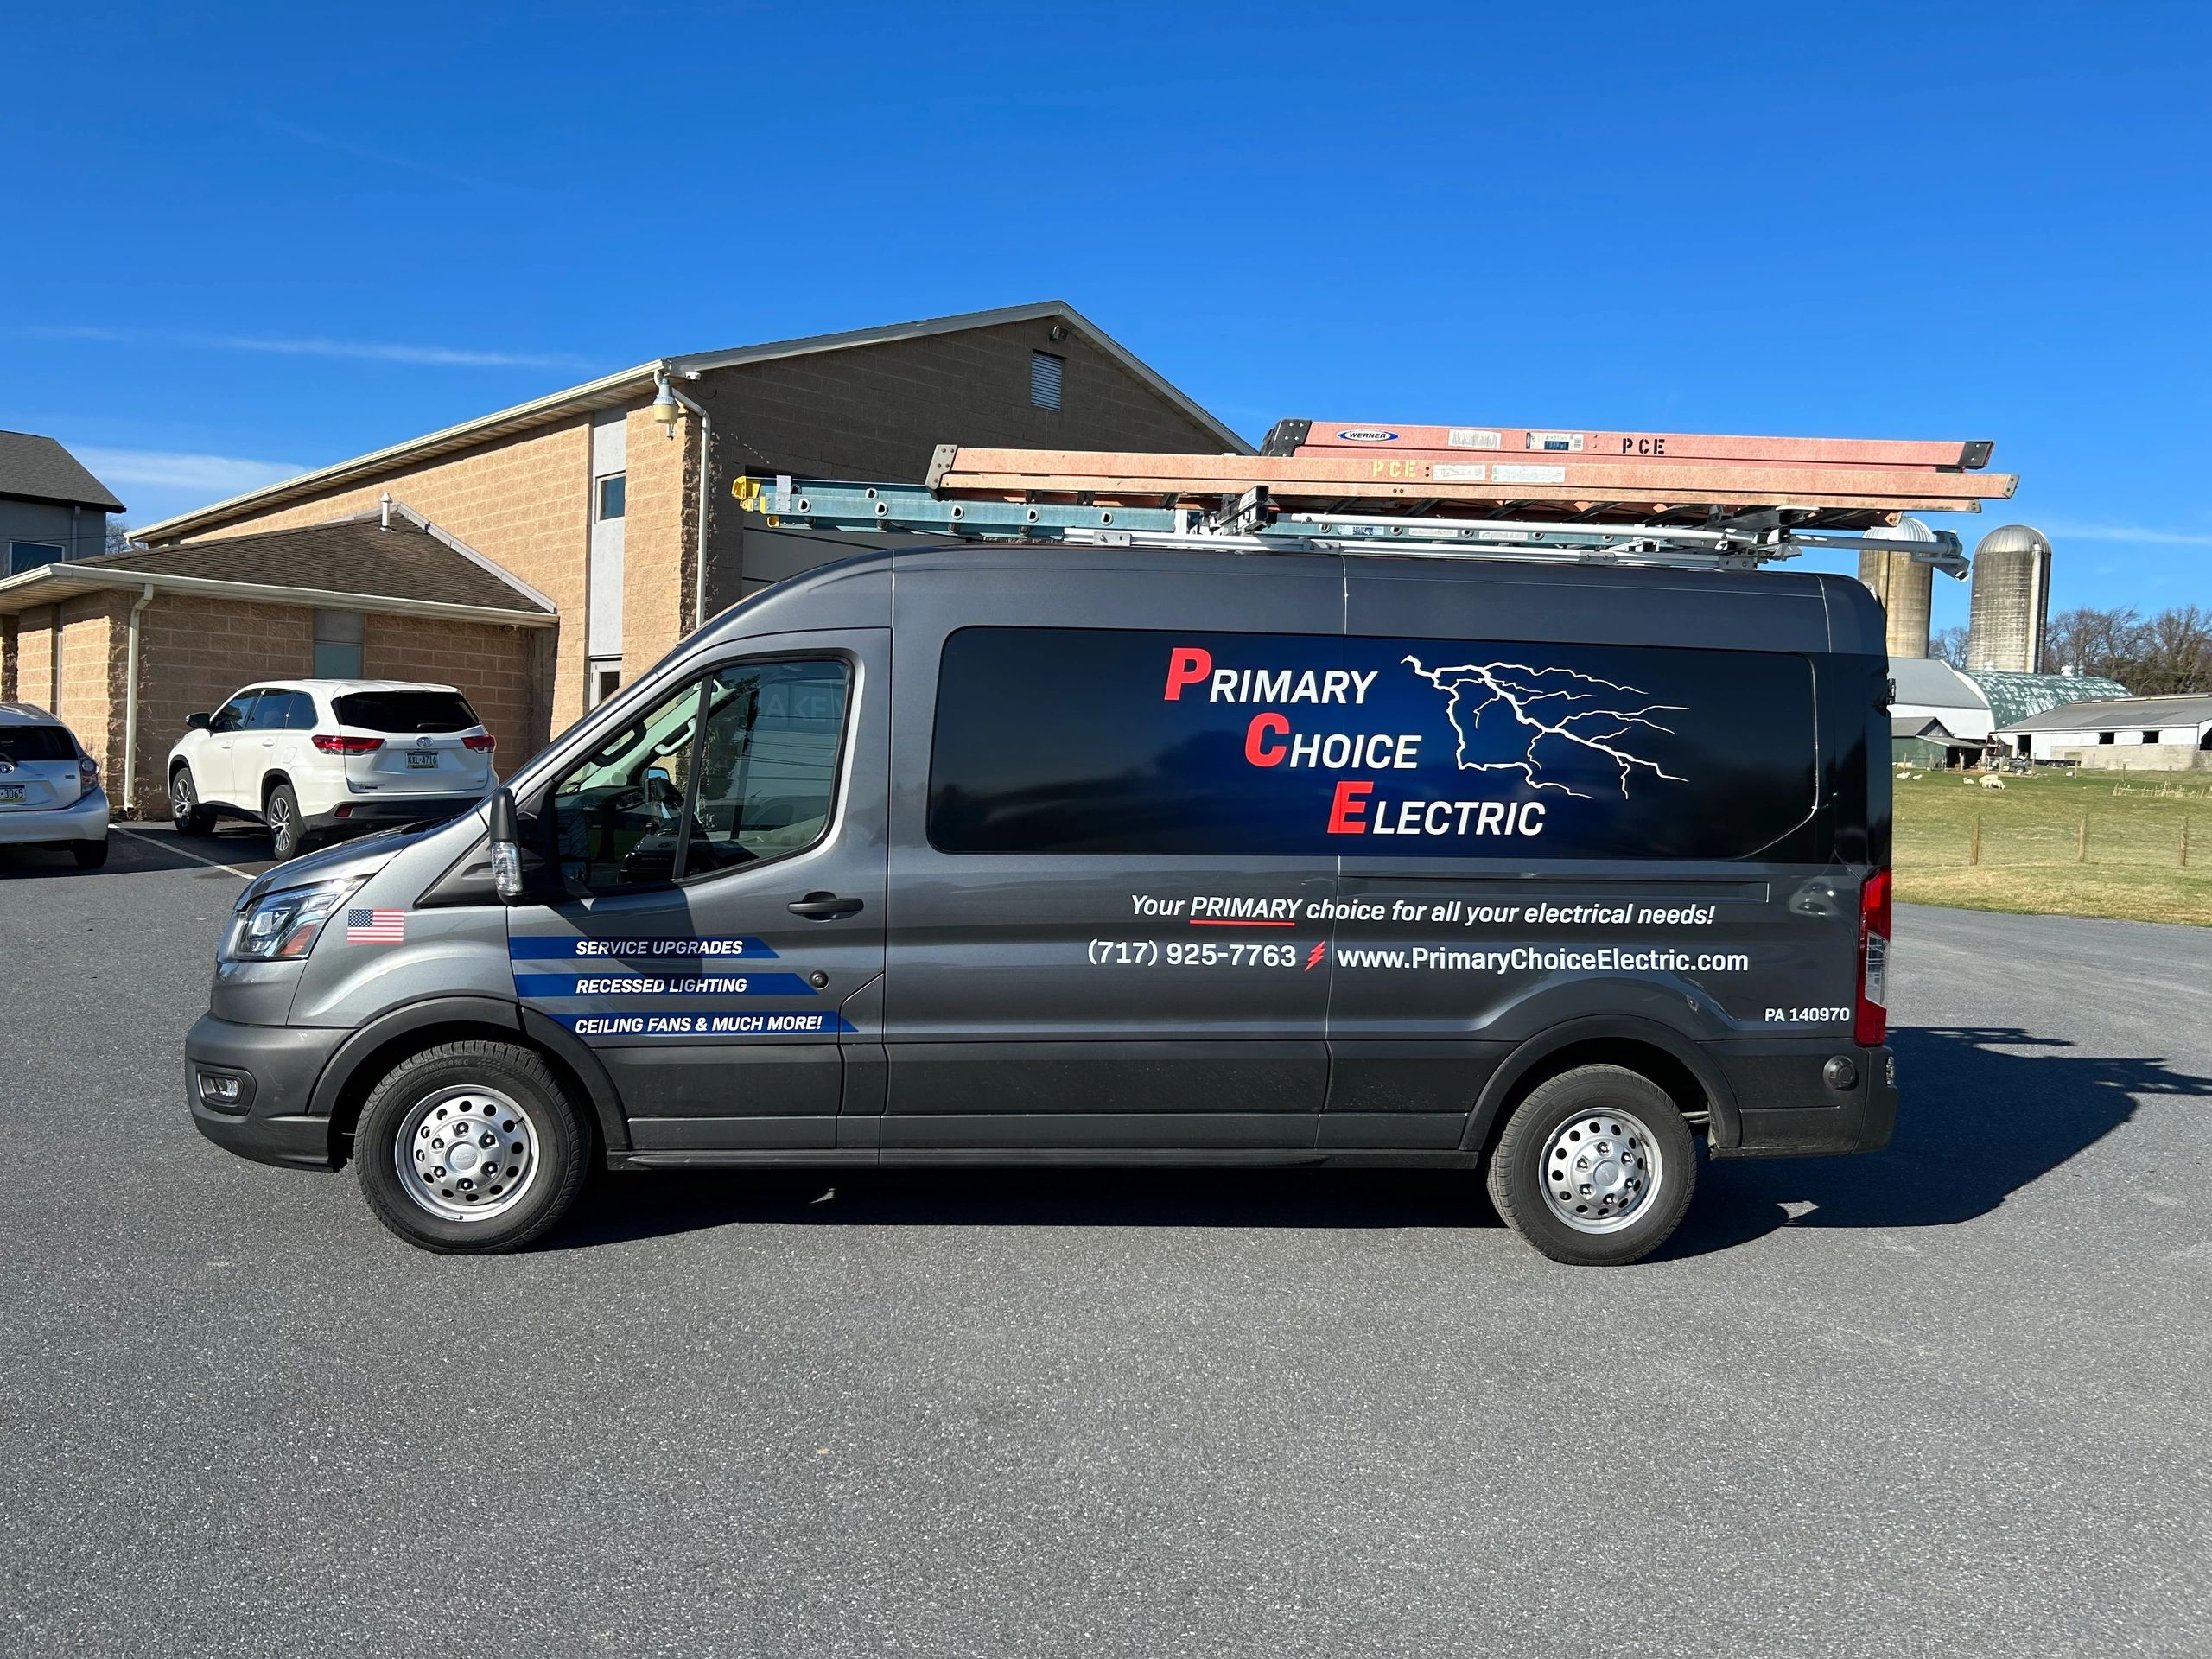 PRIMARY CHOICEELECTRIC, YOUR RESIDENTIAL ELECTRICIAN IN LANCASTER, PA